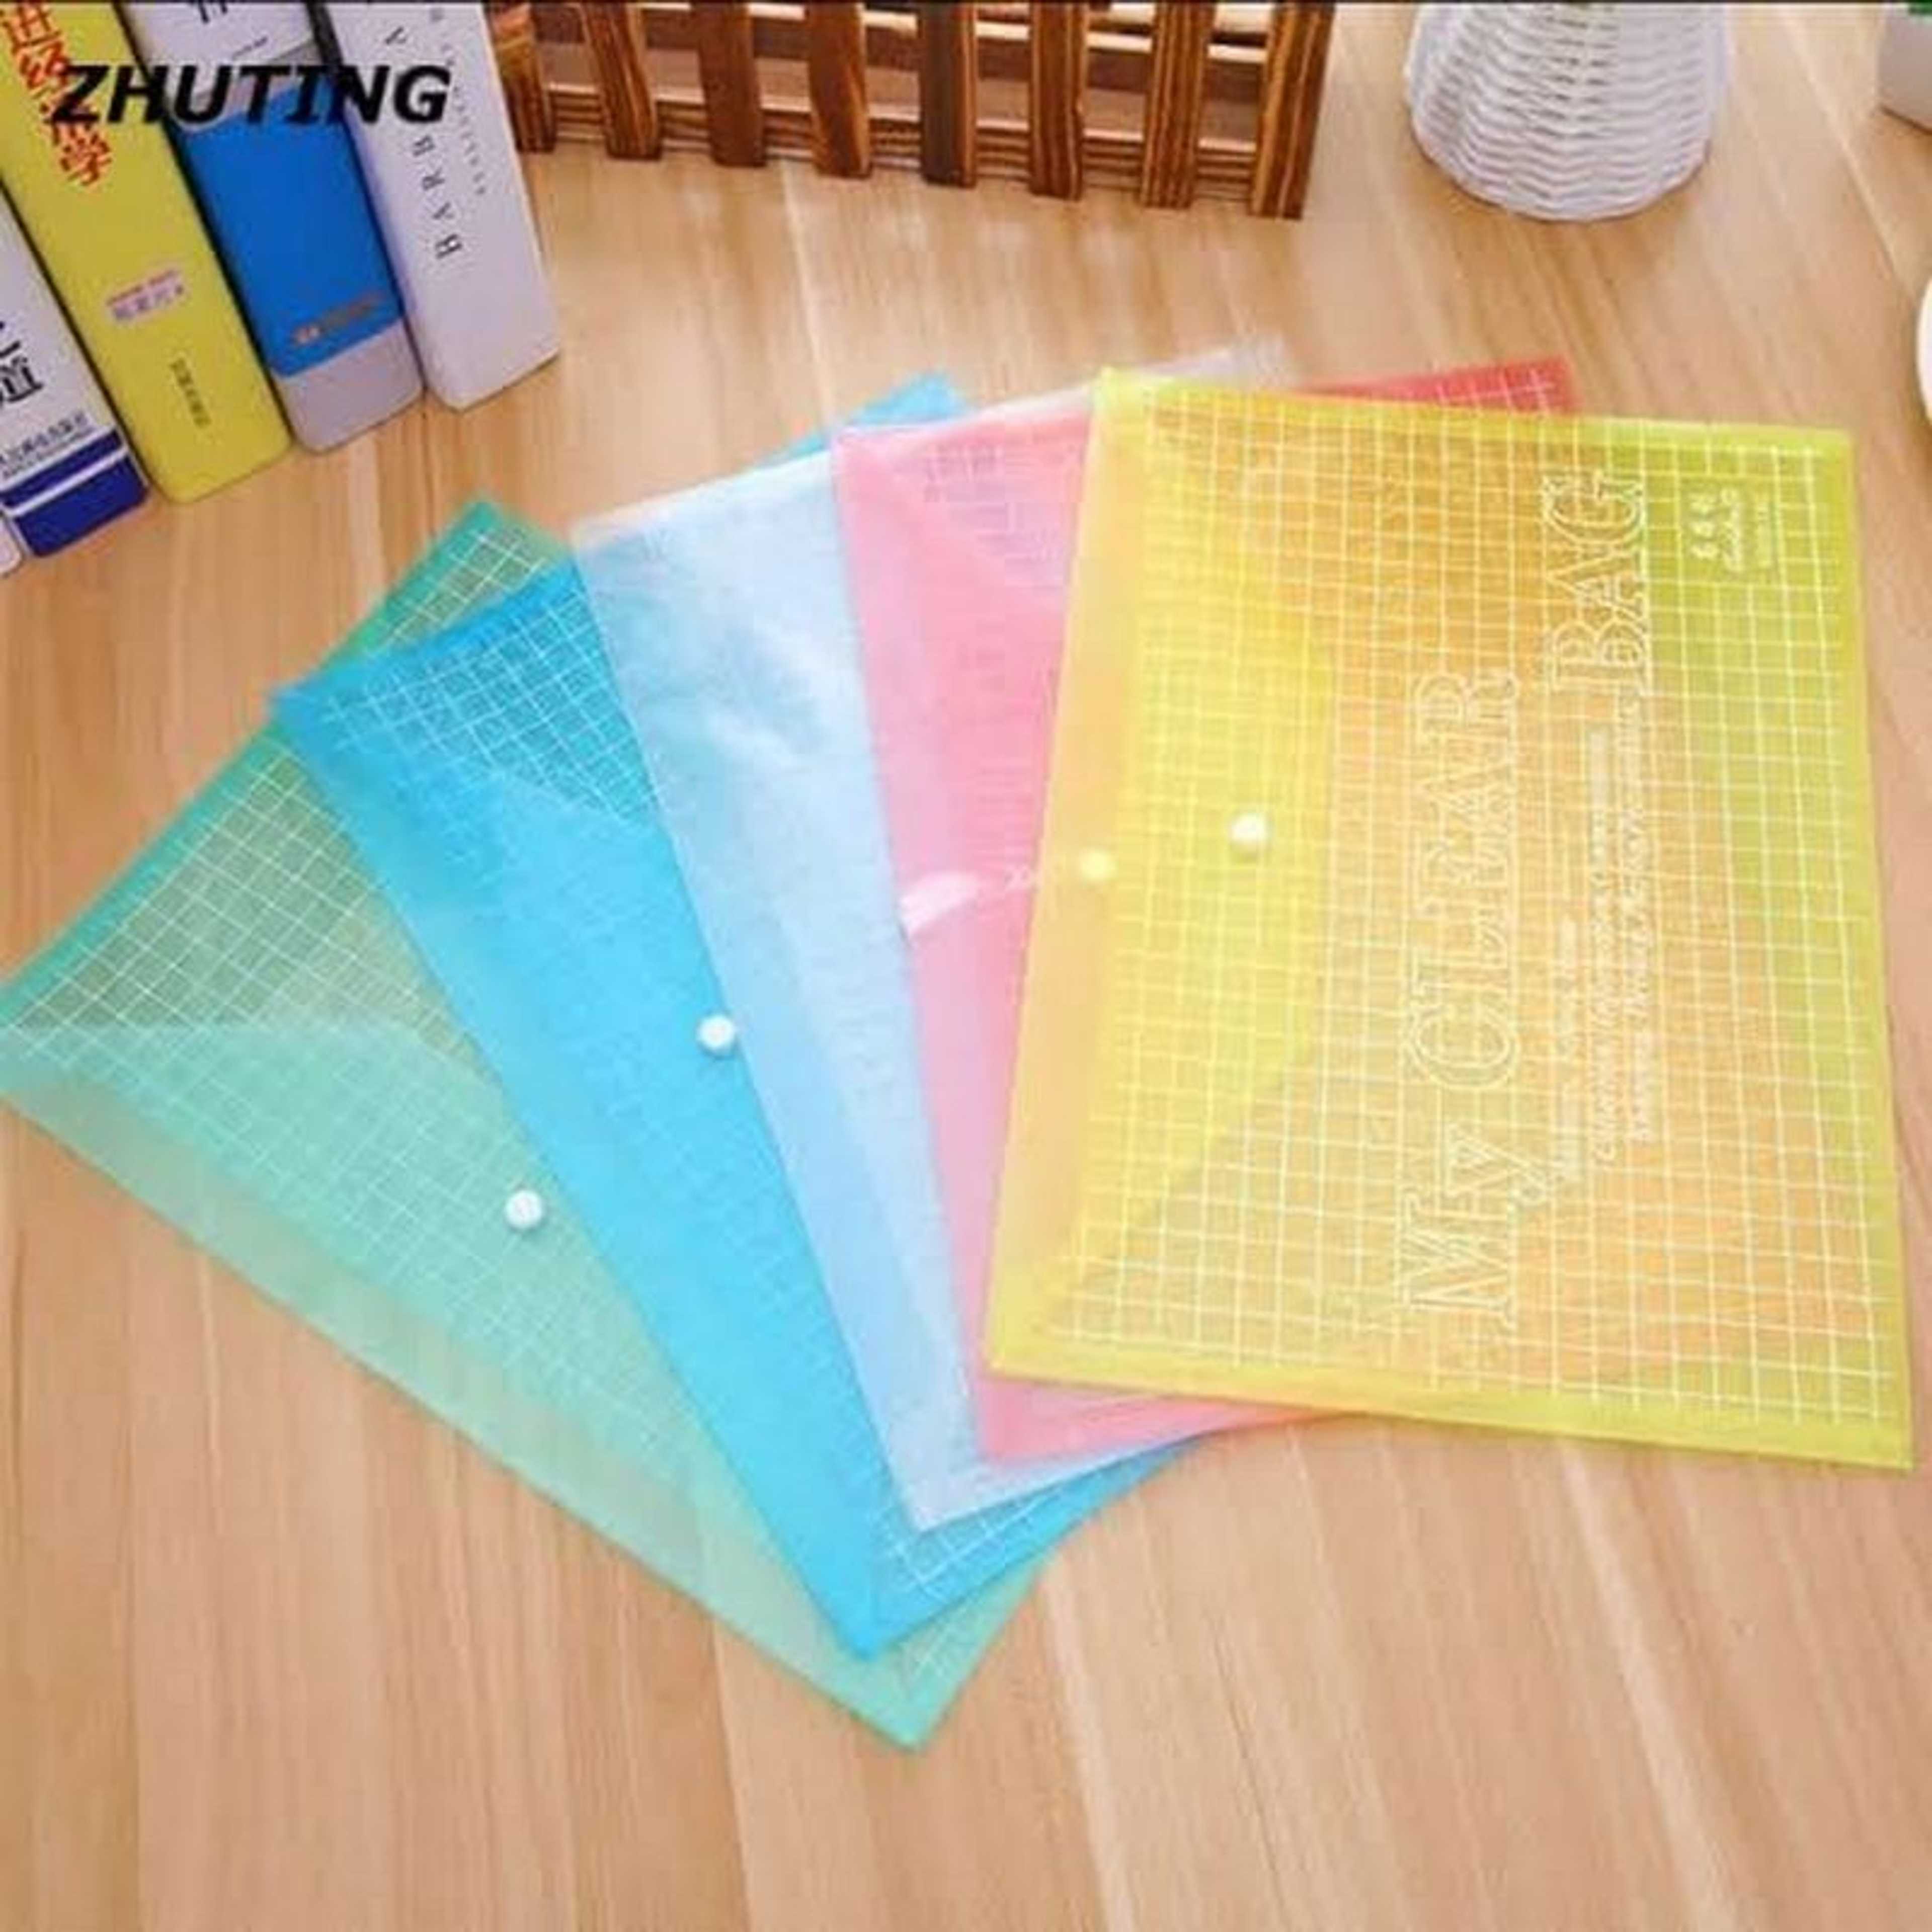 Pack of 6 - Random Color Plastic Clear Bag A4 Size Documents File, A4 Document Organizer, Plastic Folders for File,Transparent My Clear Bag,Office Supplies File Folders for School and Office